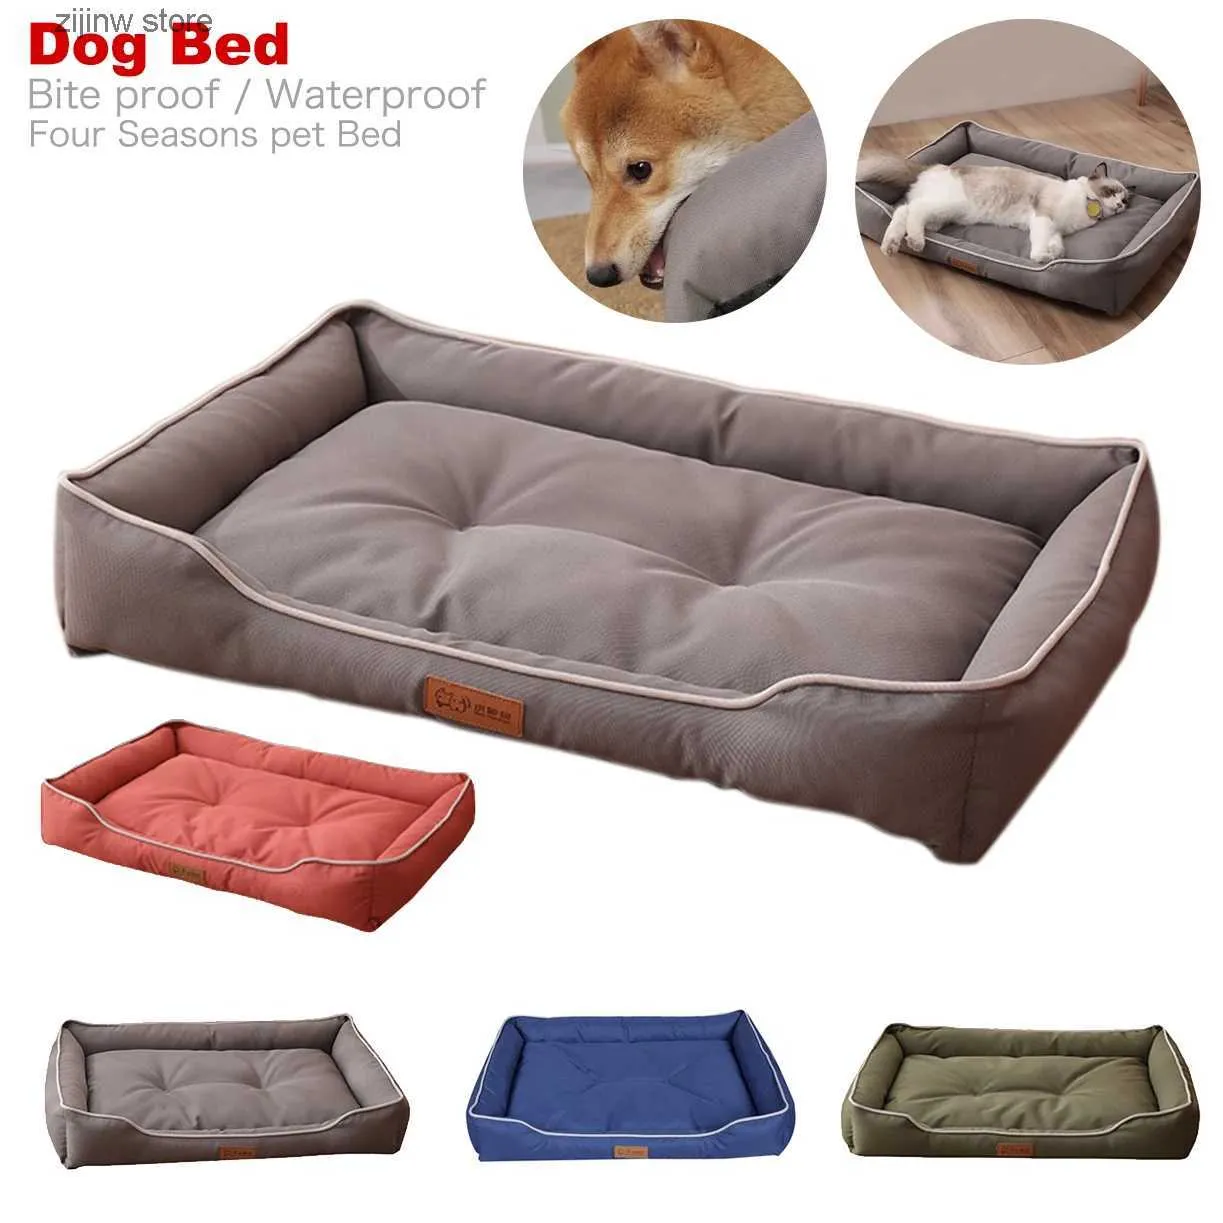 kennels pens Large Dog Bed Bite Resistant Waterproof Wear-resistant Pet Cat Mat for Boat Soft High Rebound Sofa Dog Cushion Cat Accessories Y240322